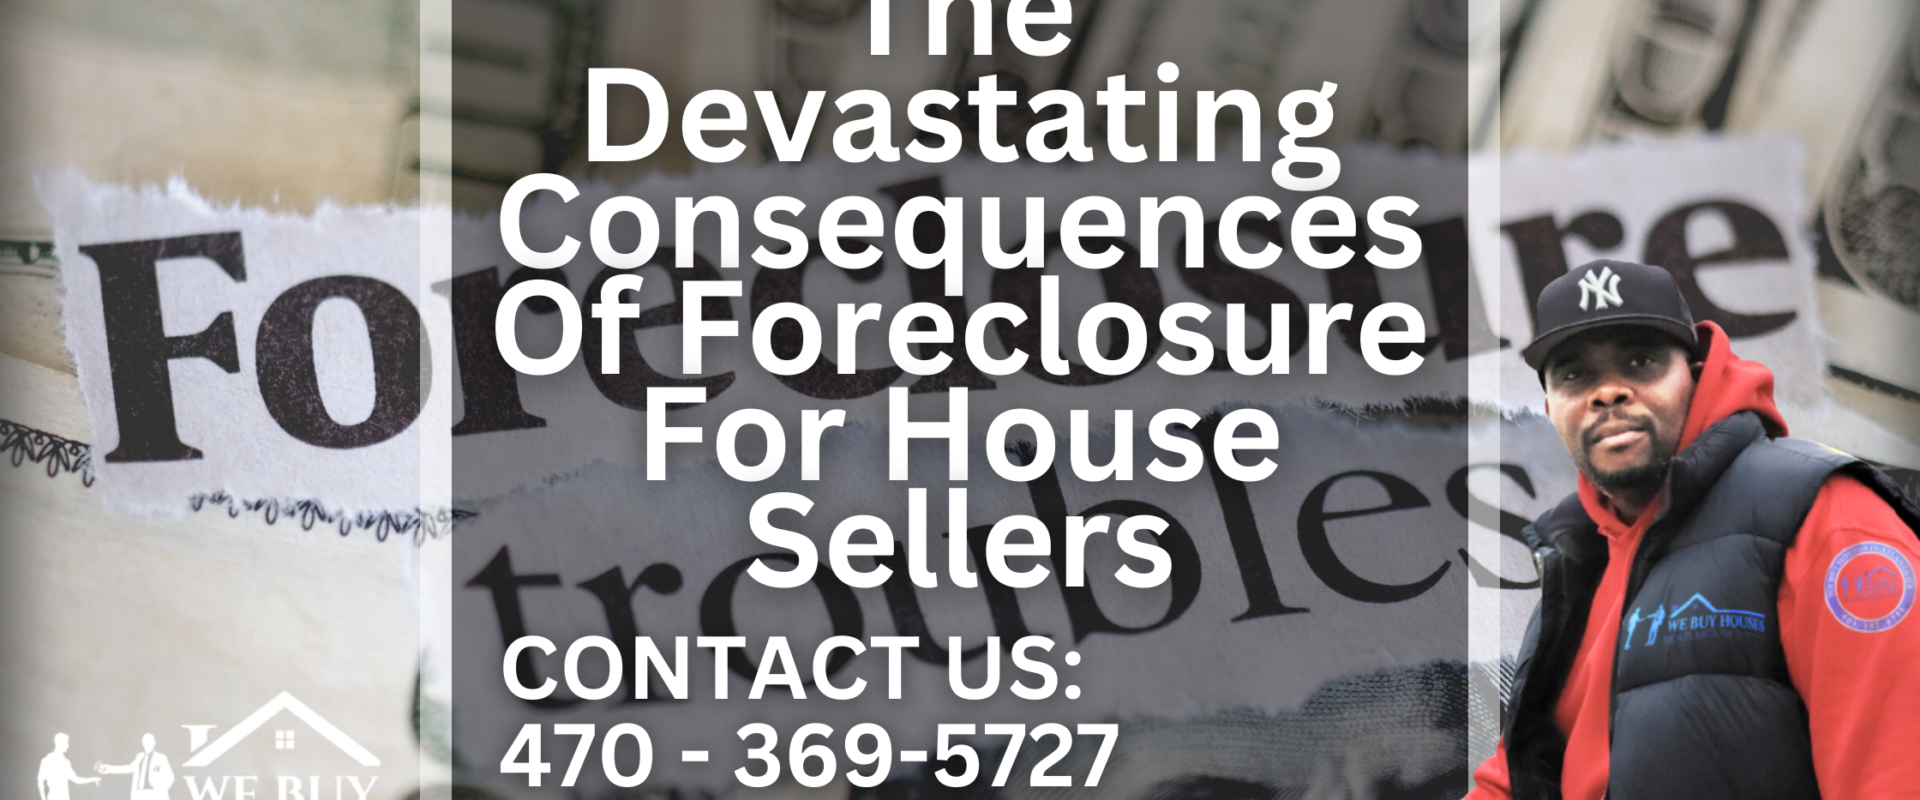 The Devastating Consequences Of Foreclosure For House Sellers